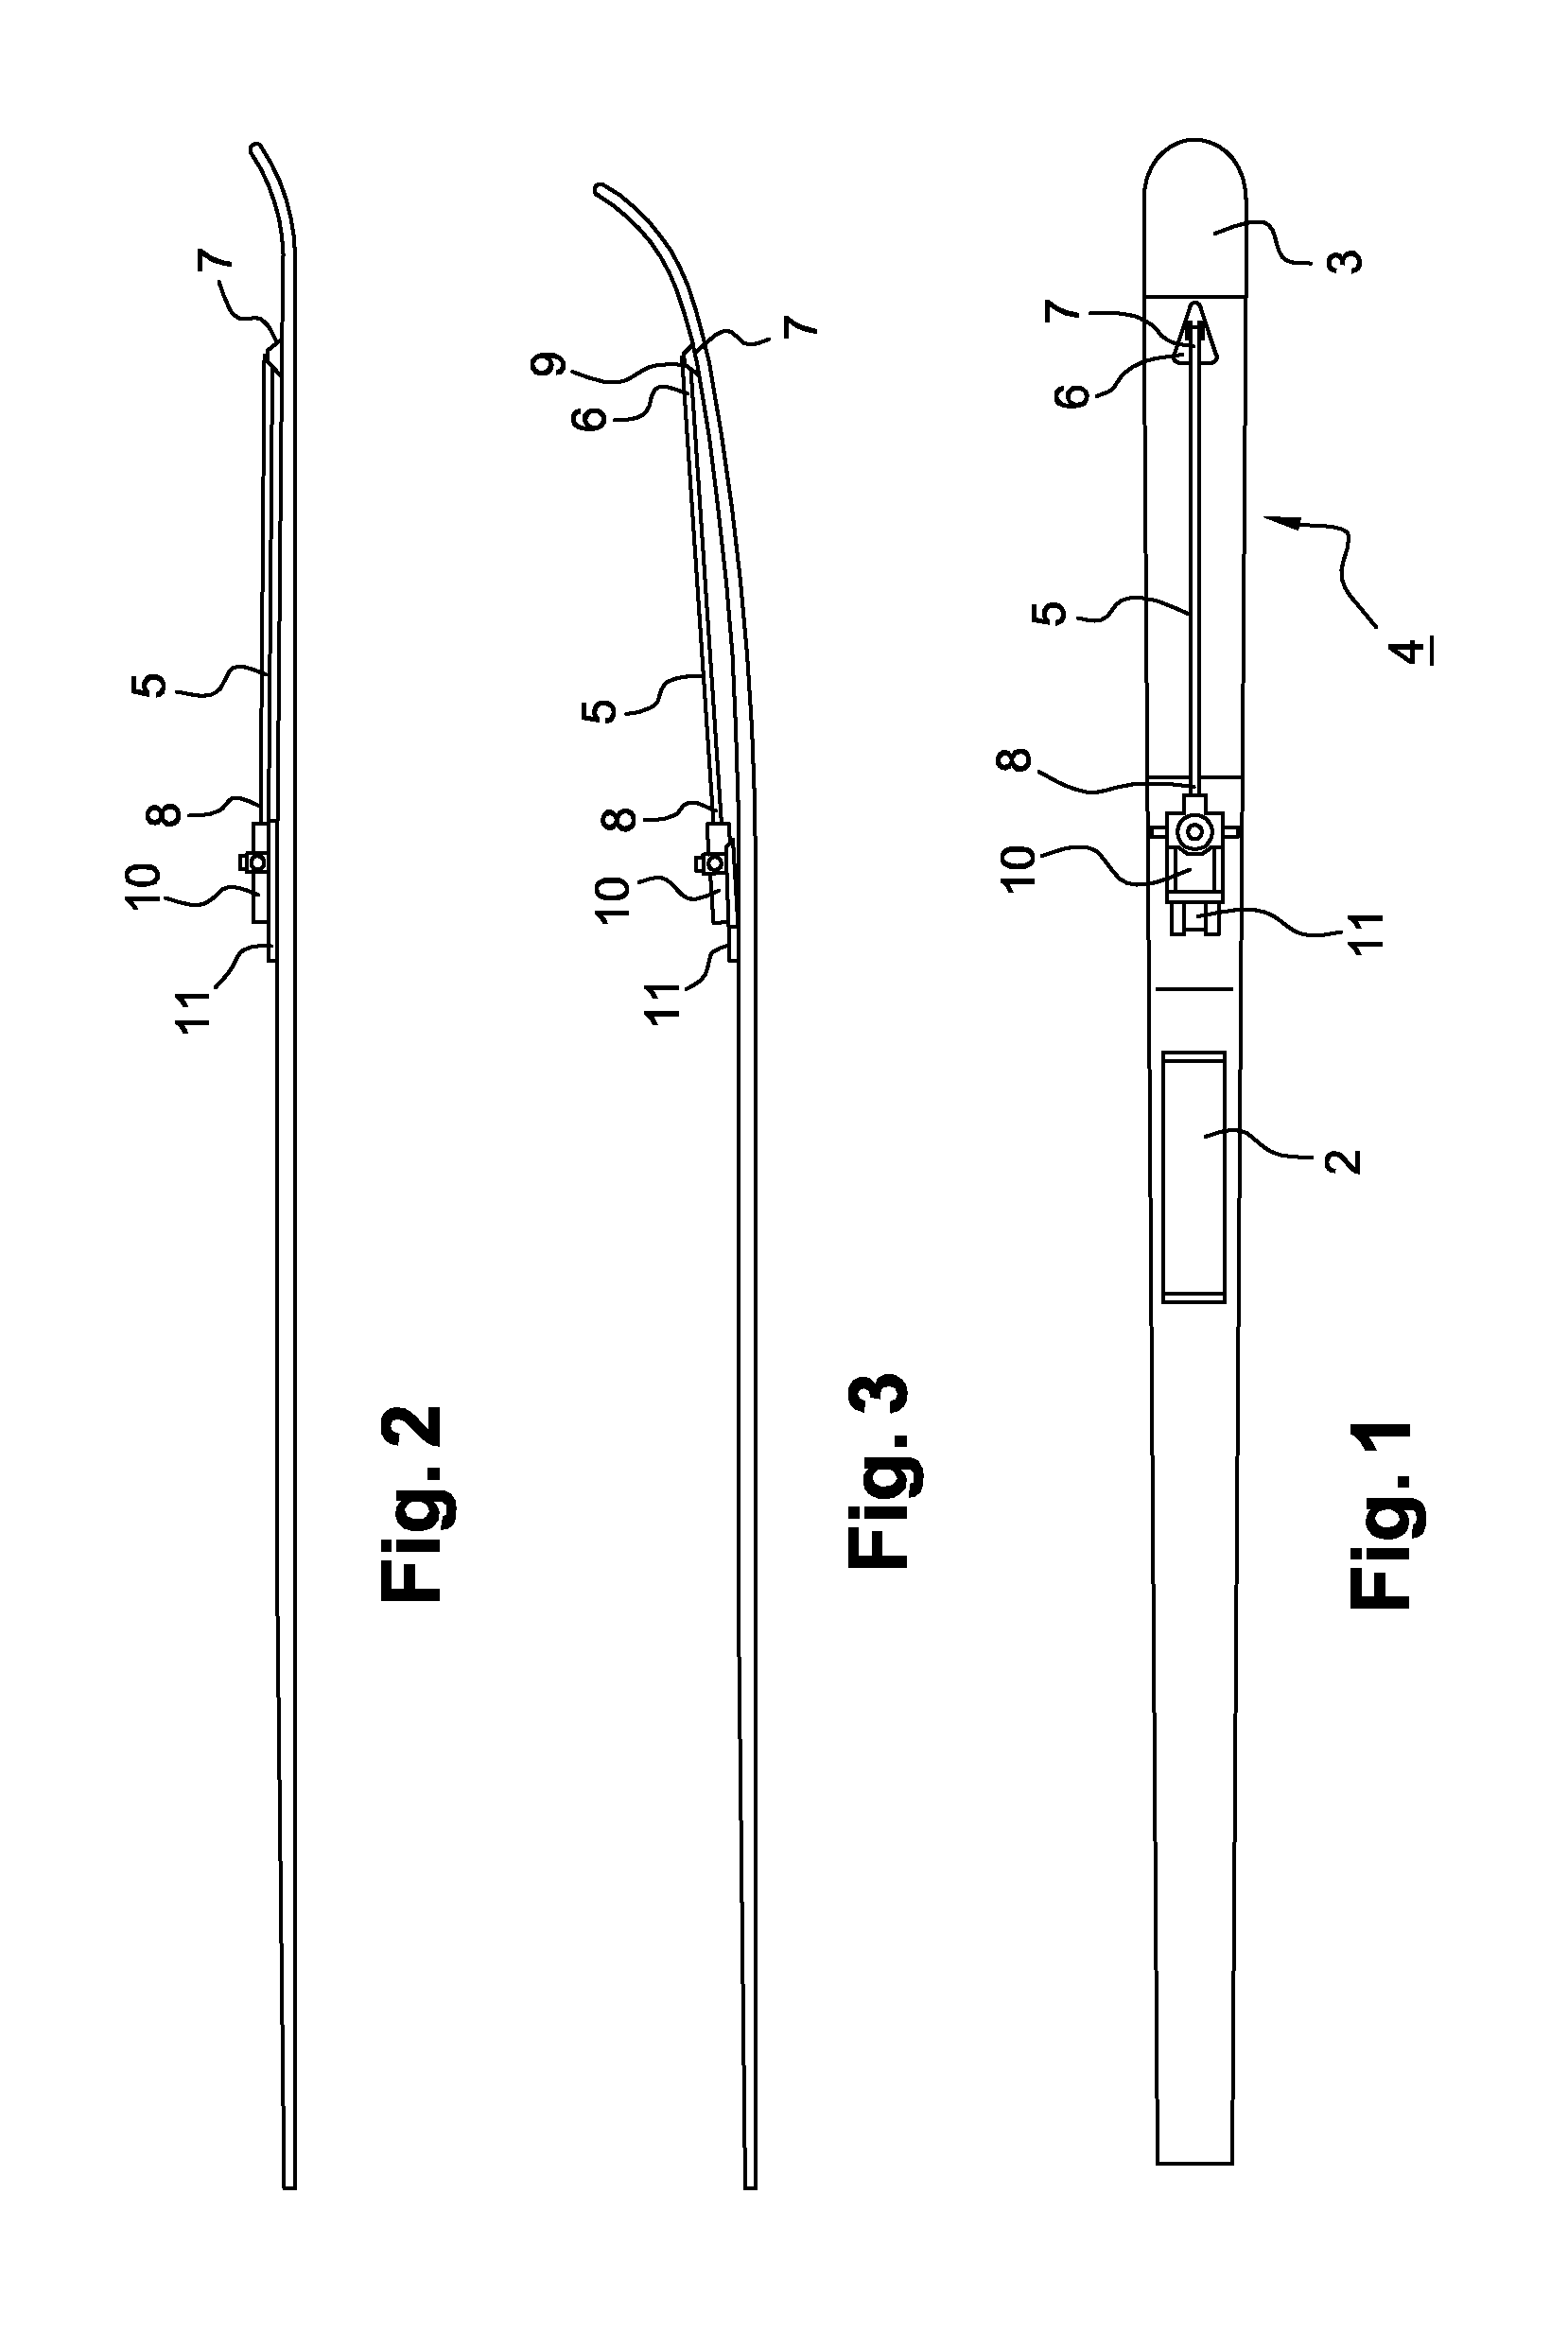 Gliding board with a damping device